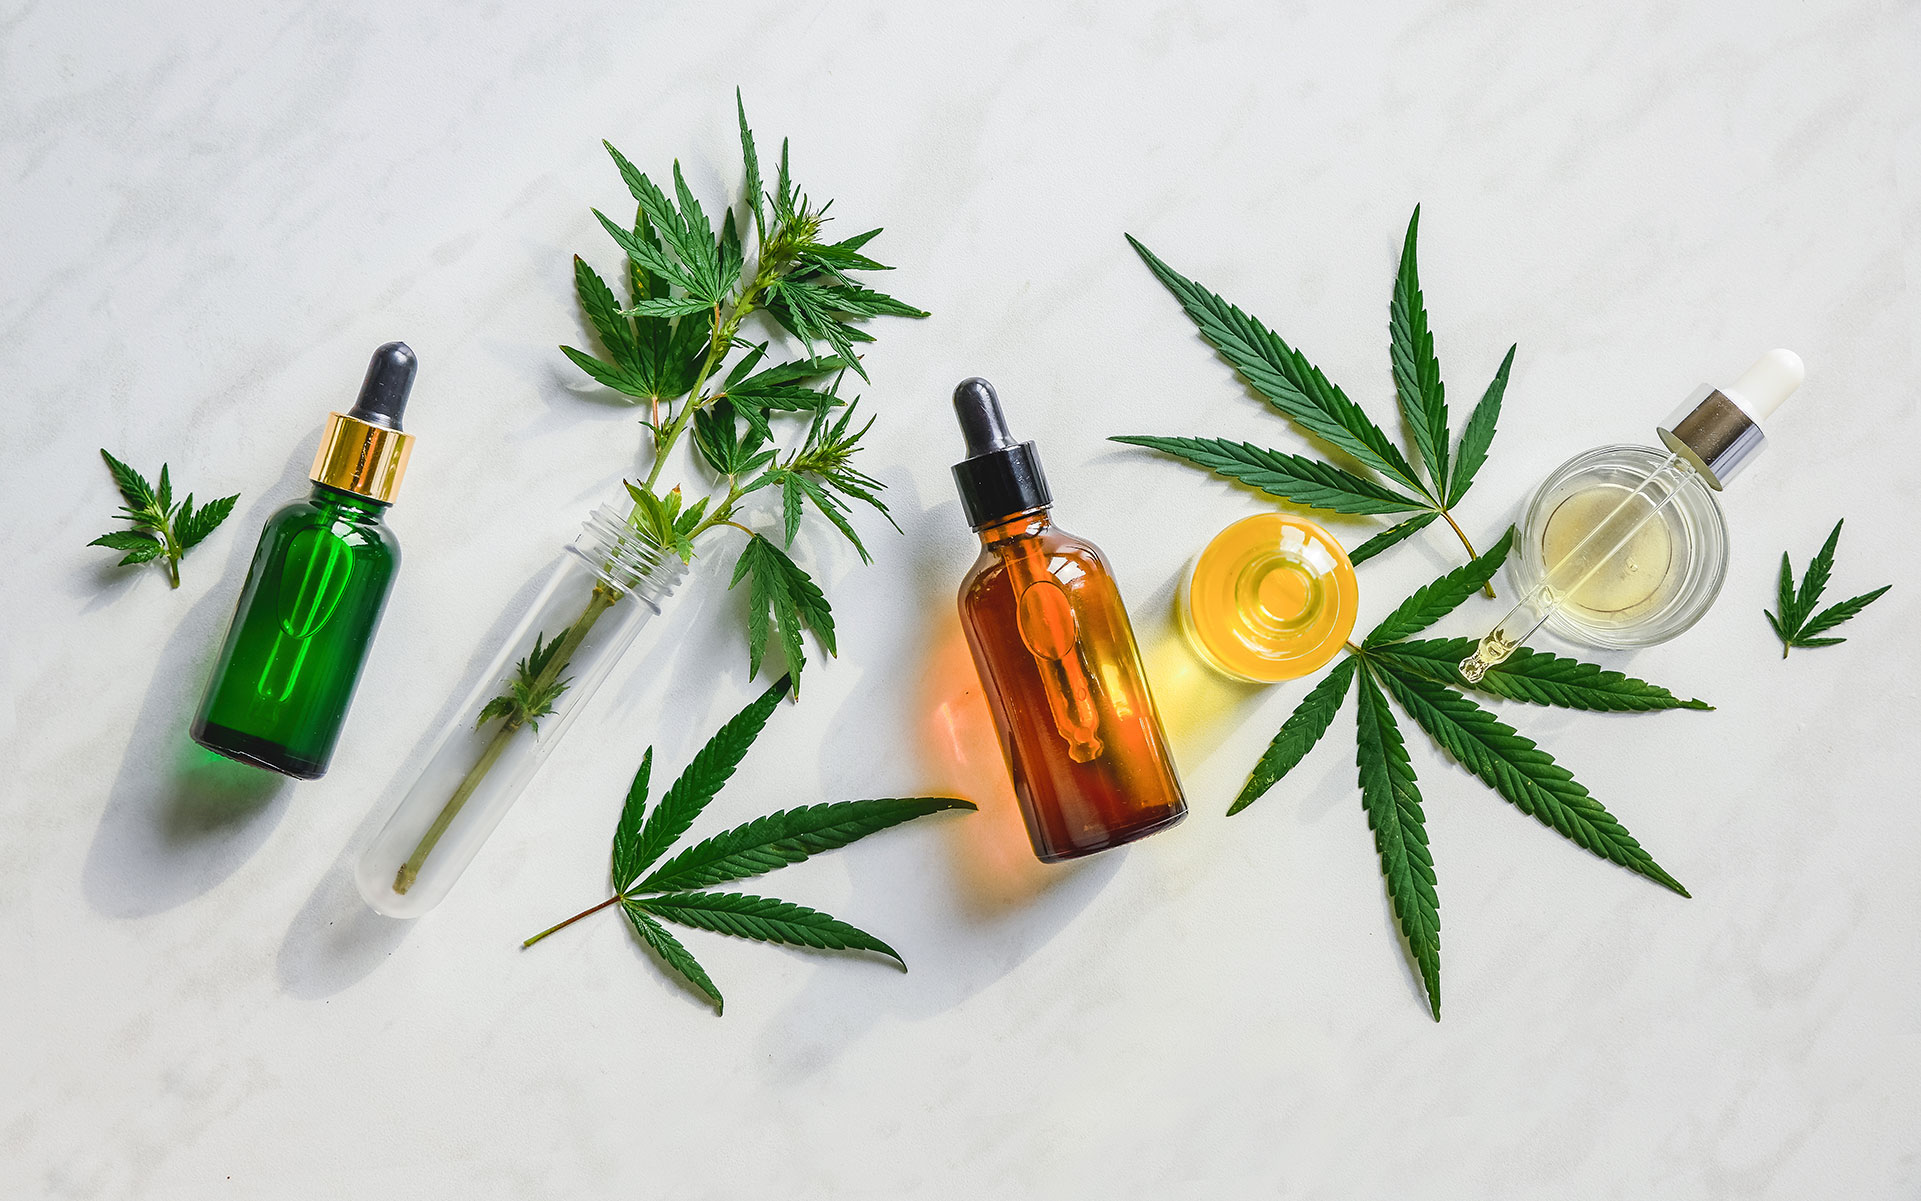 What Retail Stores Carry Pet Relief Cbd Oil - Cbd|Oil|Cannabidiol|Products|View|Abstract|Effects|Hemp|Cannabis|Product|Thc|Pain|People|Health|Body|Plant|Cannabinoids|Medications|Oils|Drug|Benefits|System|Study|Marijuana|Anxiety|Side|Research|Effect|Liver|Quality|Treatment|Studies|Epilepsy|Symptoms|Gummies|Compounds|Dose|Time|Inflammation|Bottle|Cbd Oil|View Abstract|Side Effects|Cbd Products|Endocannabinoid System|Multiple Sclerosis|Cbd Oils|Cbd Gummies|Cannabis Plant|Hemp Oil|Cbd Product|Hemp Plant|United States|Cytochrome P450|Many People|Chronic Pain|Nuleaf Naturals|Royal Cbd|Full-Spectrum Cbd Oil|Drug Administration|Cbd Oil Products|Medical Marijuana|Drug Test|Heavy Metals|Clinical Trial|Clinical Trials|Cbd Oil Side|Rating Highlights|Wide Variety|Animal Studies